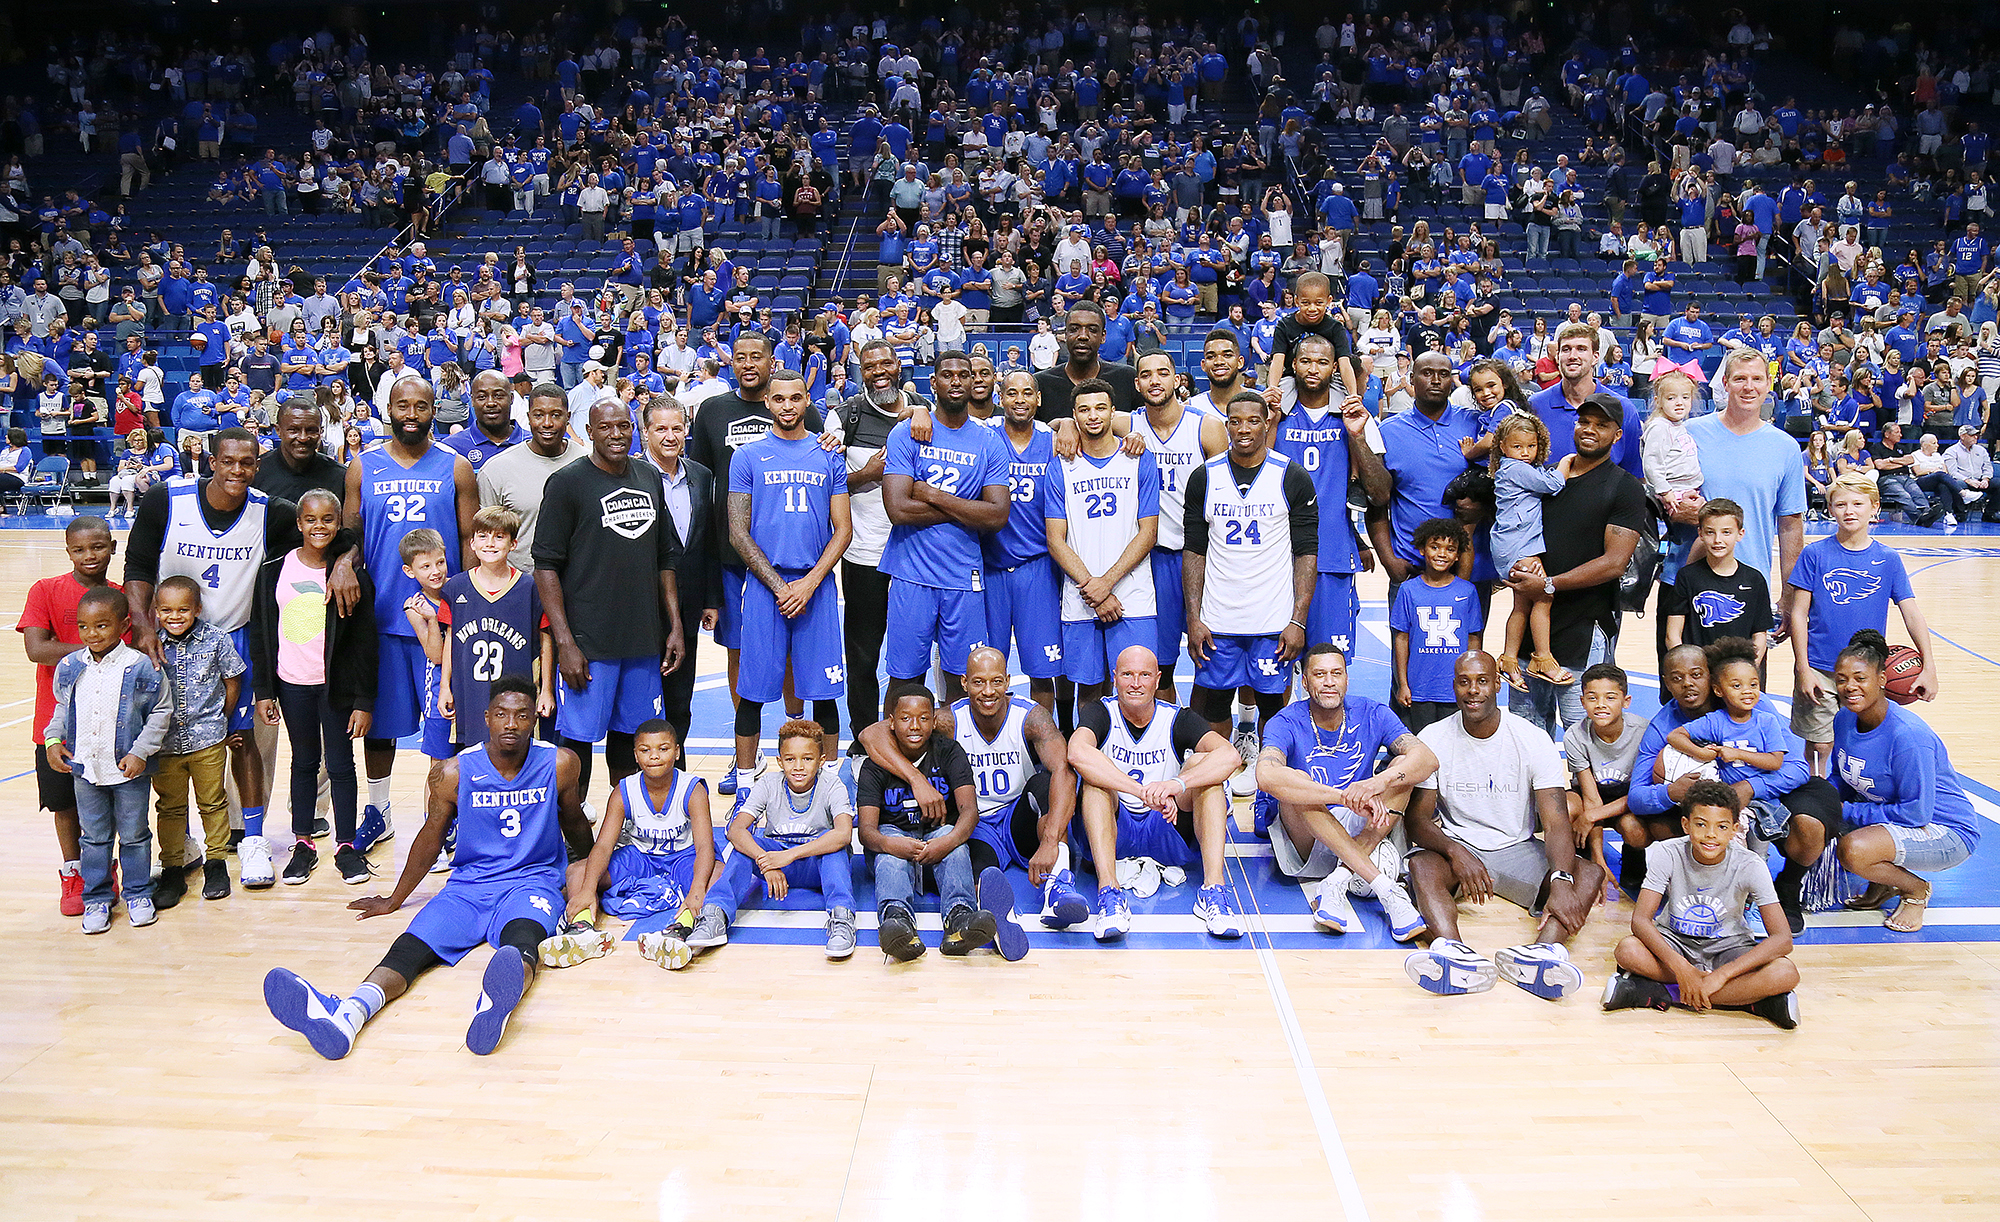 Family, Basketball and Charity: UK Alumni Charity Game a Rousing Success